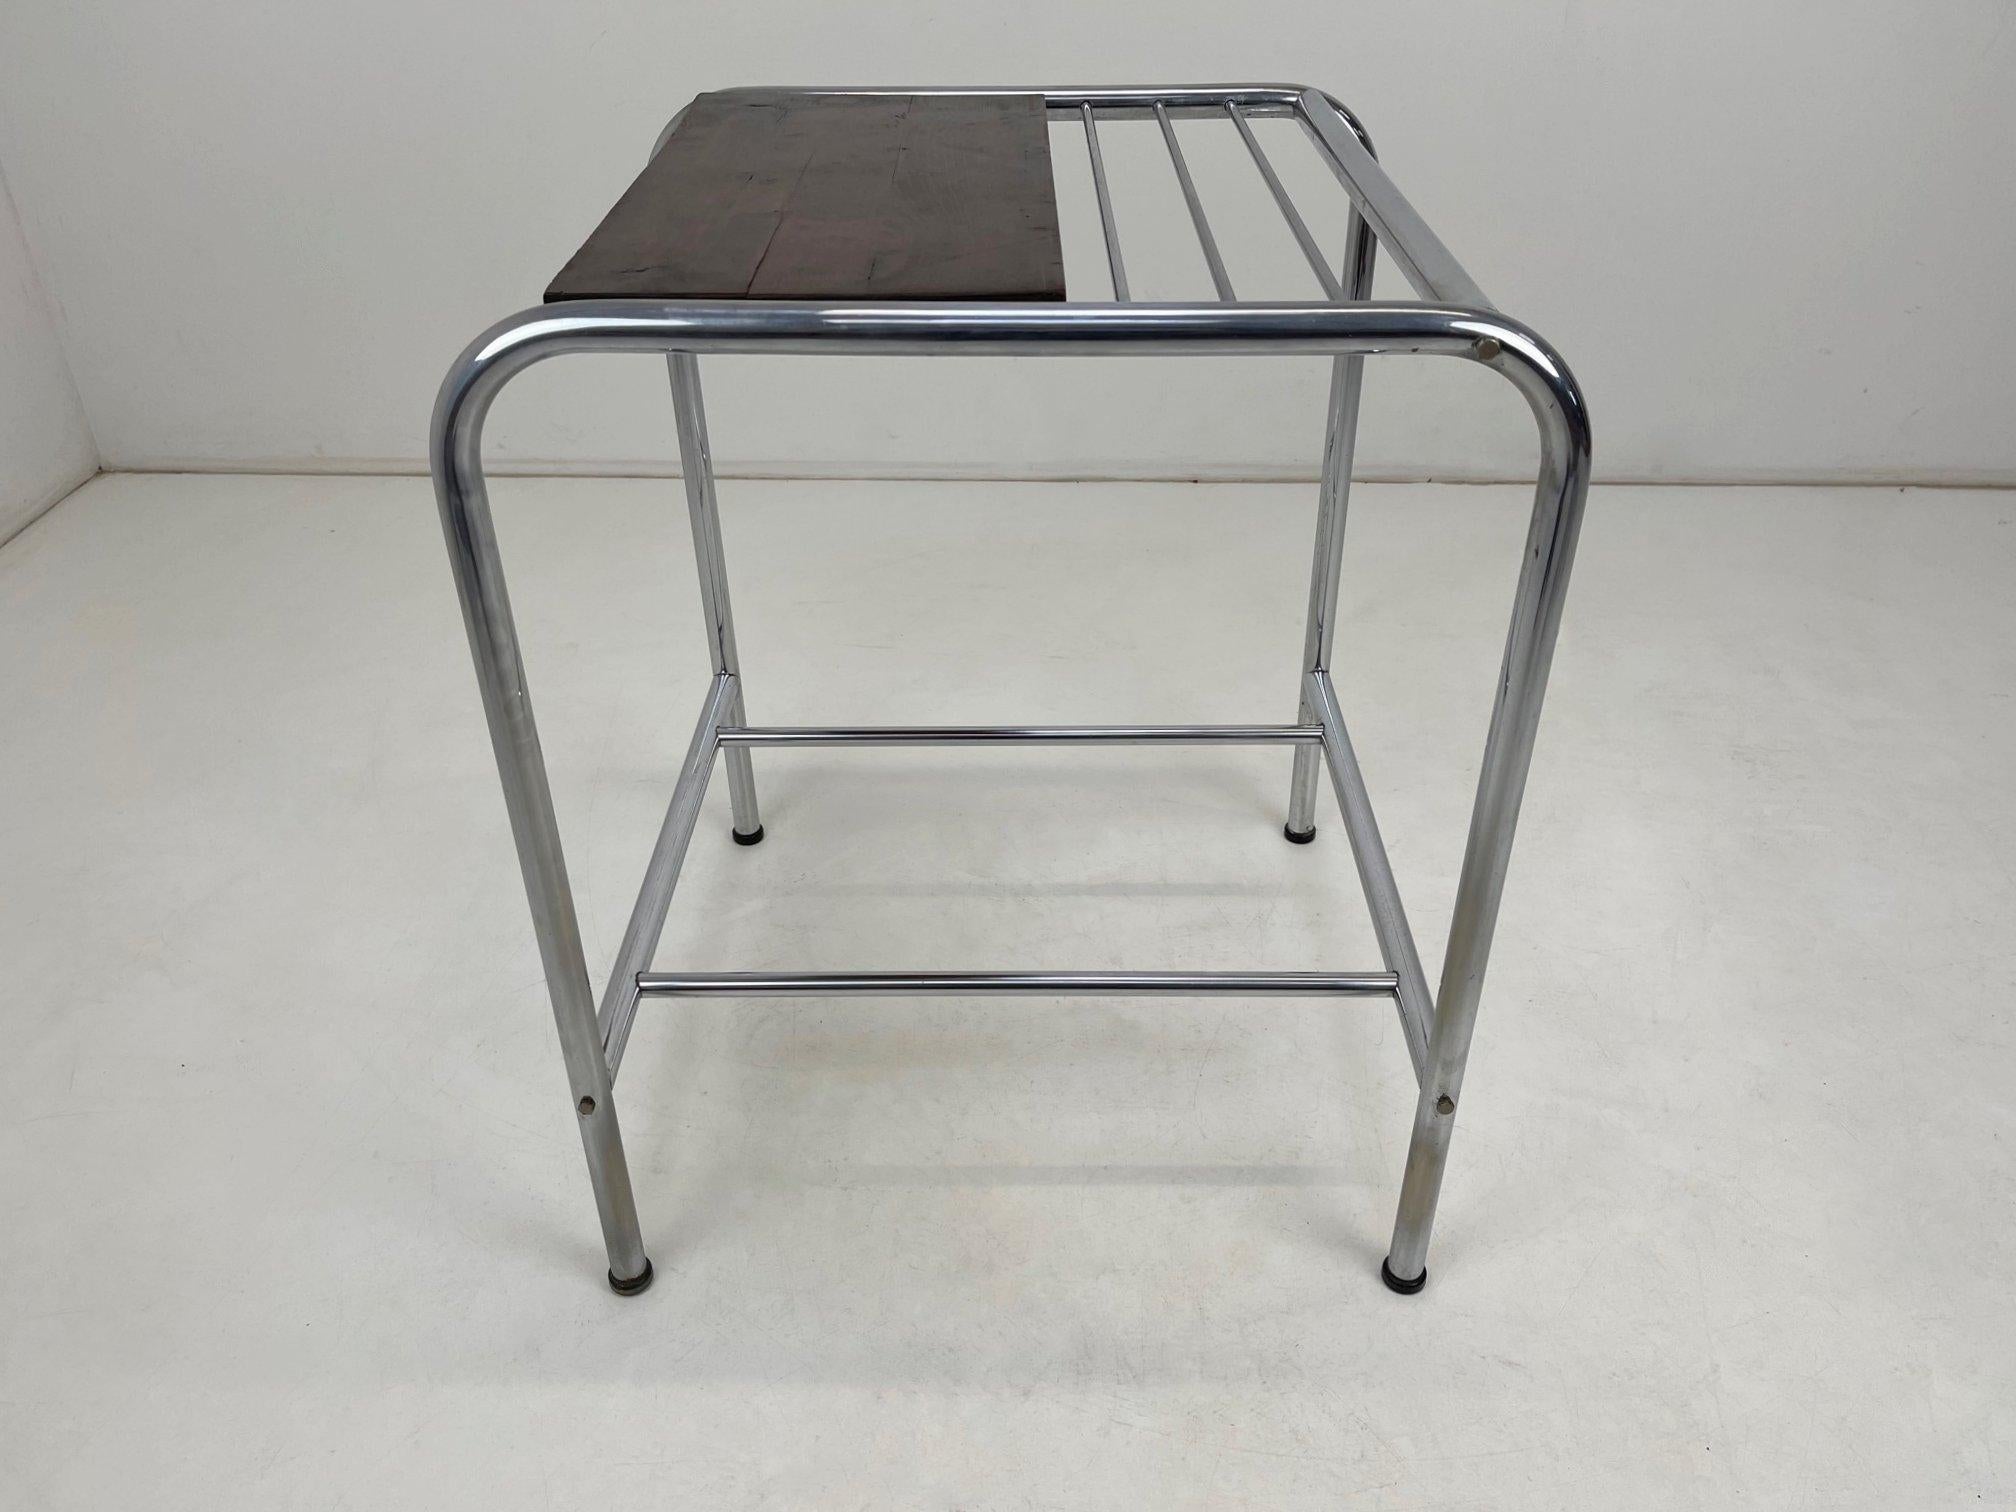 20th Century Functionalist Chrome & Wood Table, 1950's For Sale